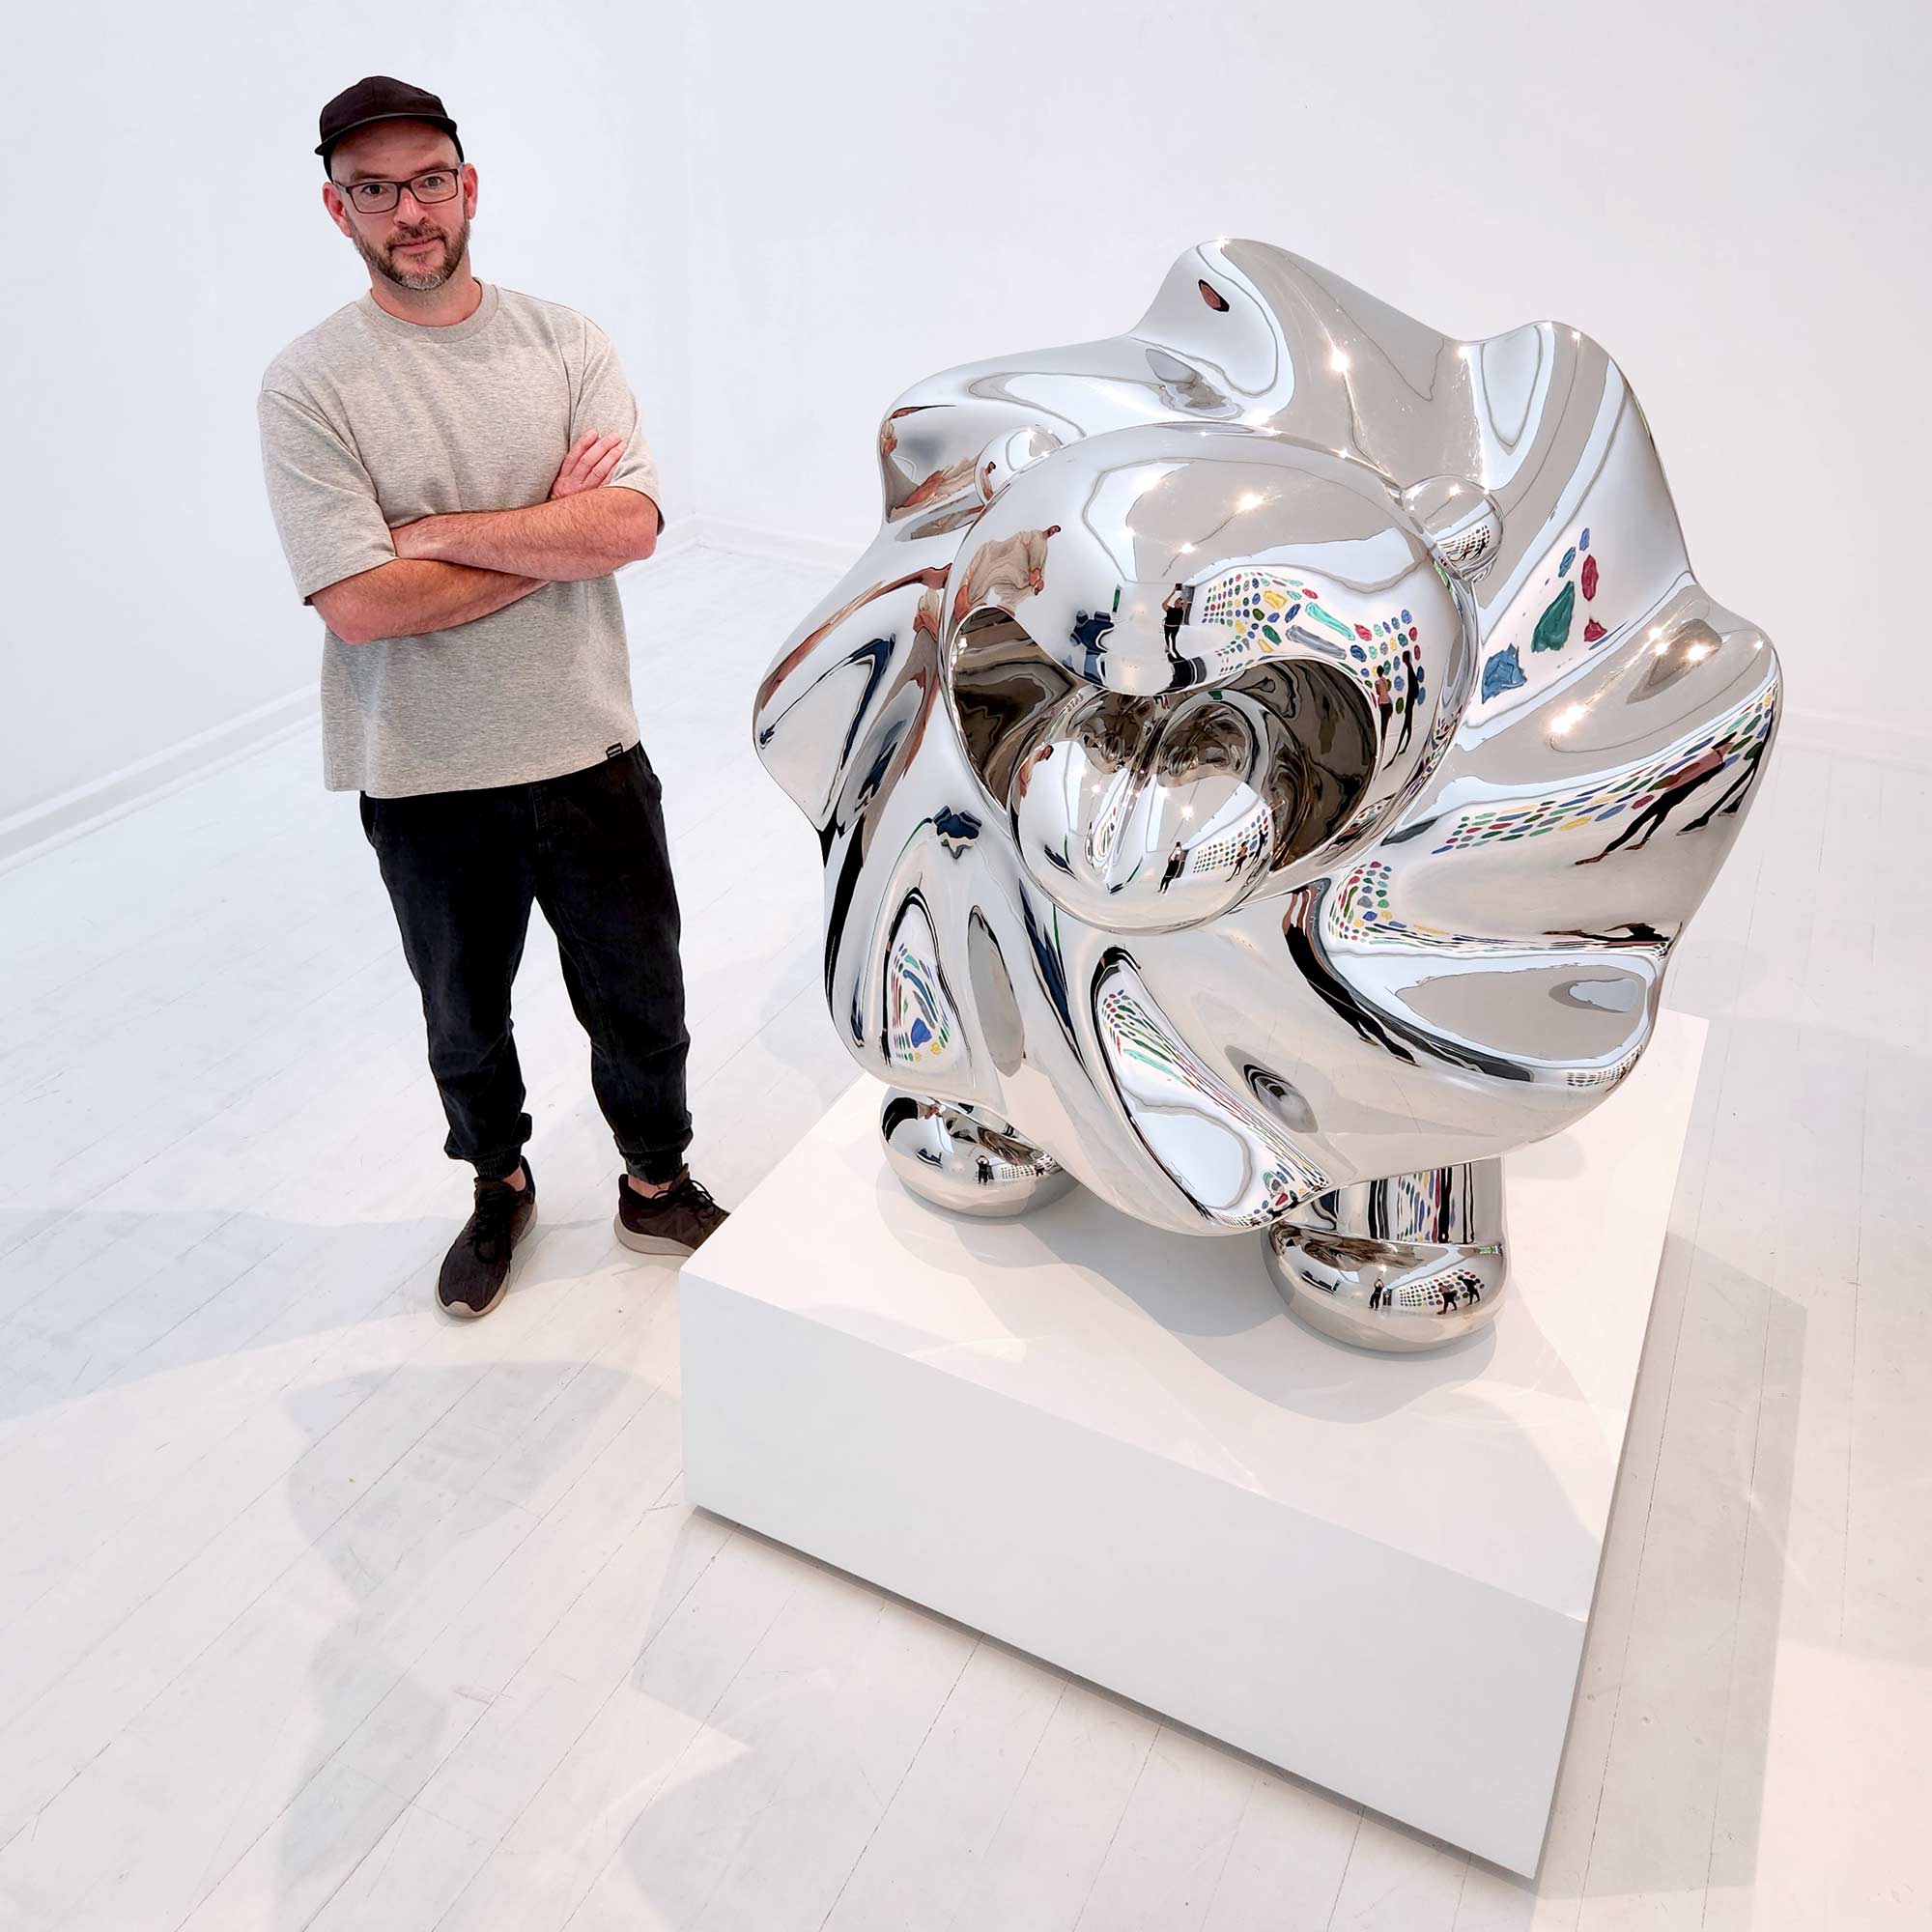 Lions breath stainless steel sculpture with Ferdi B Dick the artist standing next to sculpture 